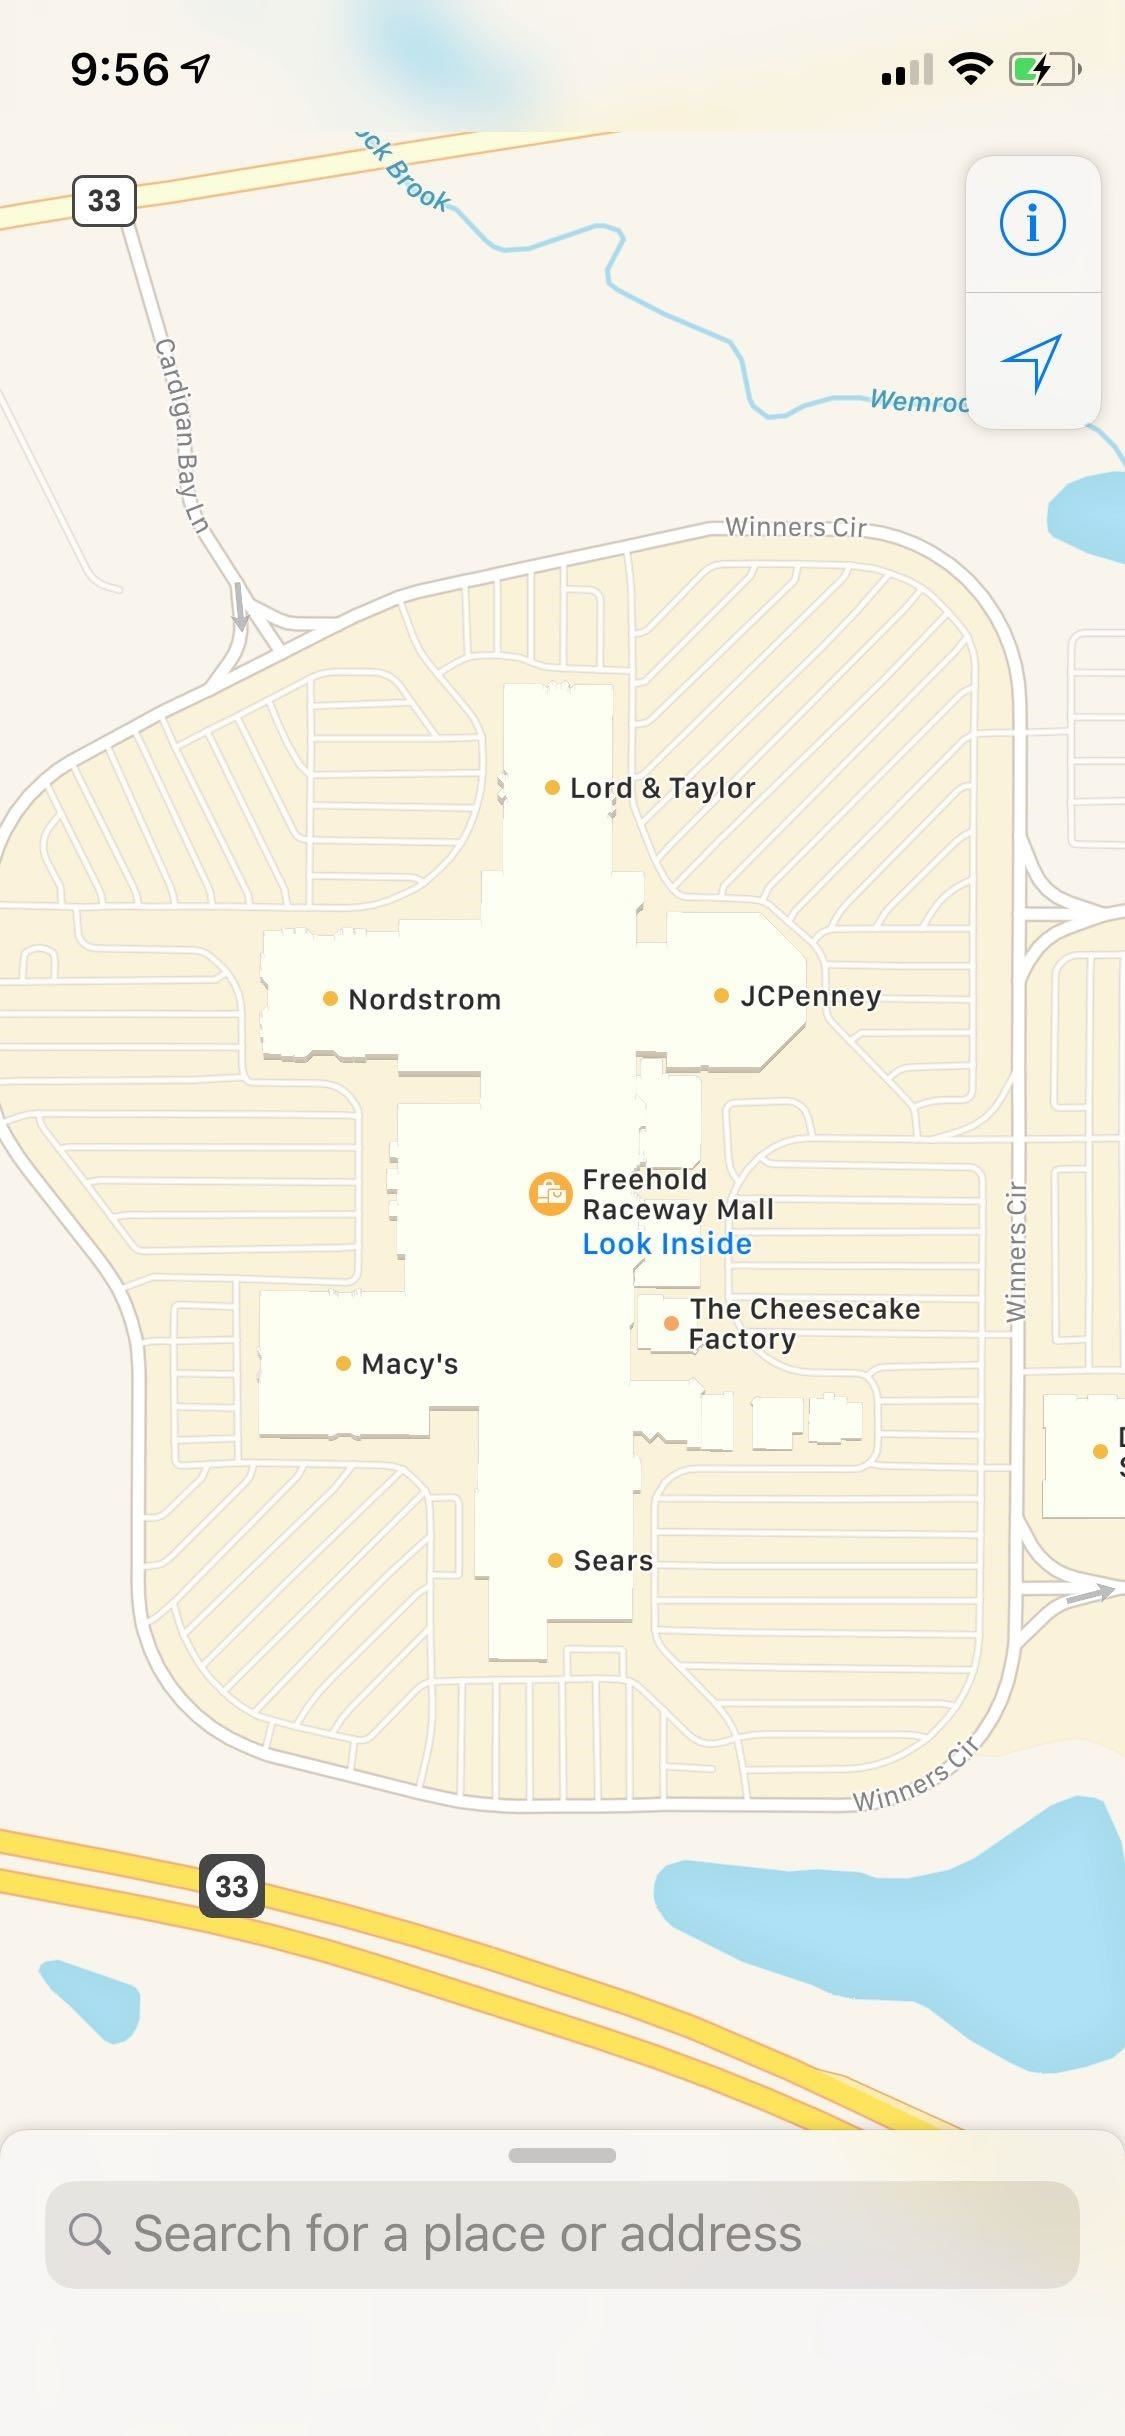 How to View Indoor Maps for Malls & Airports in Apple Maps